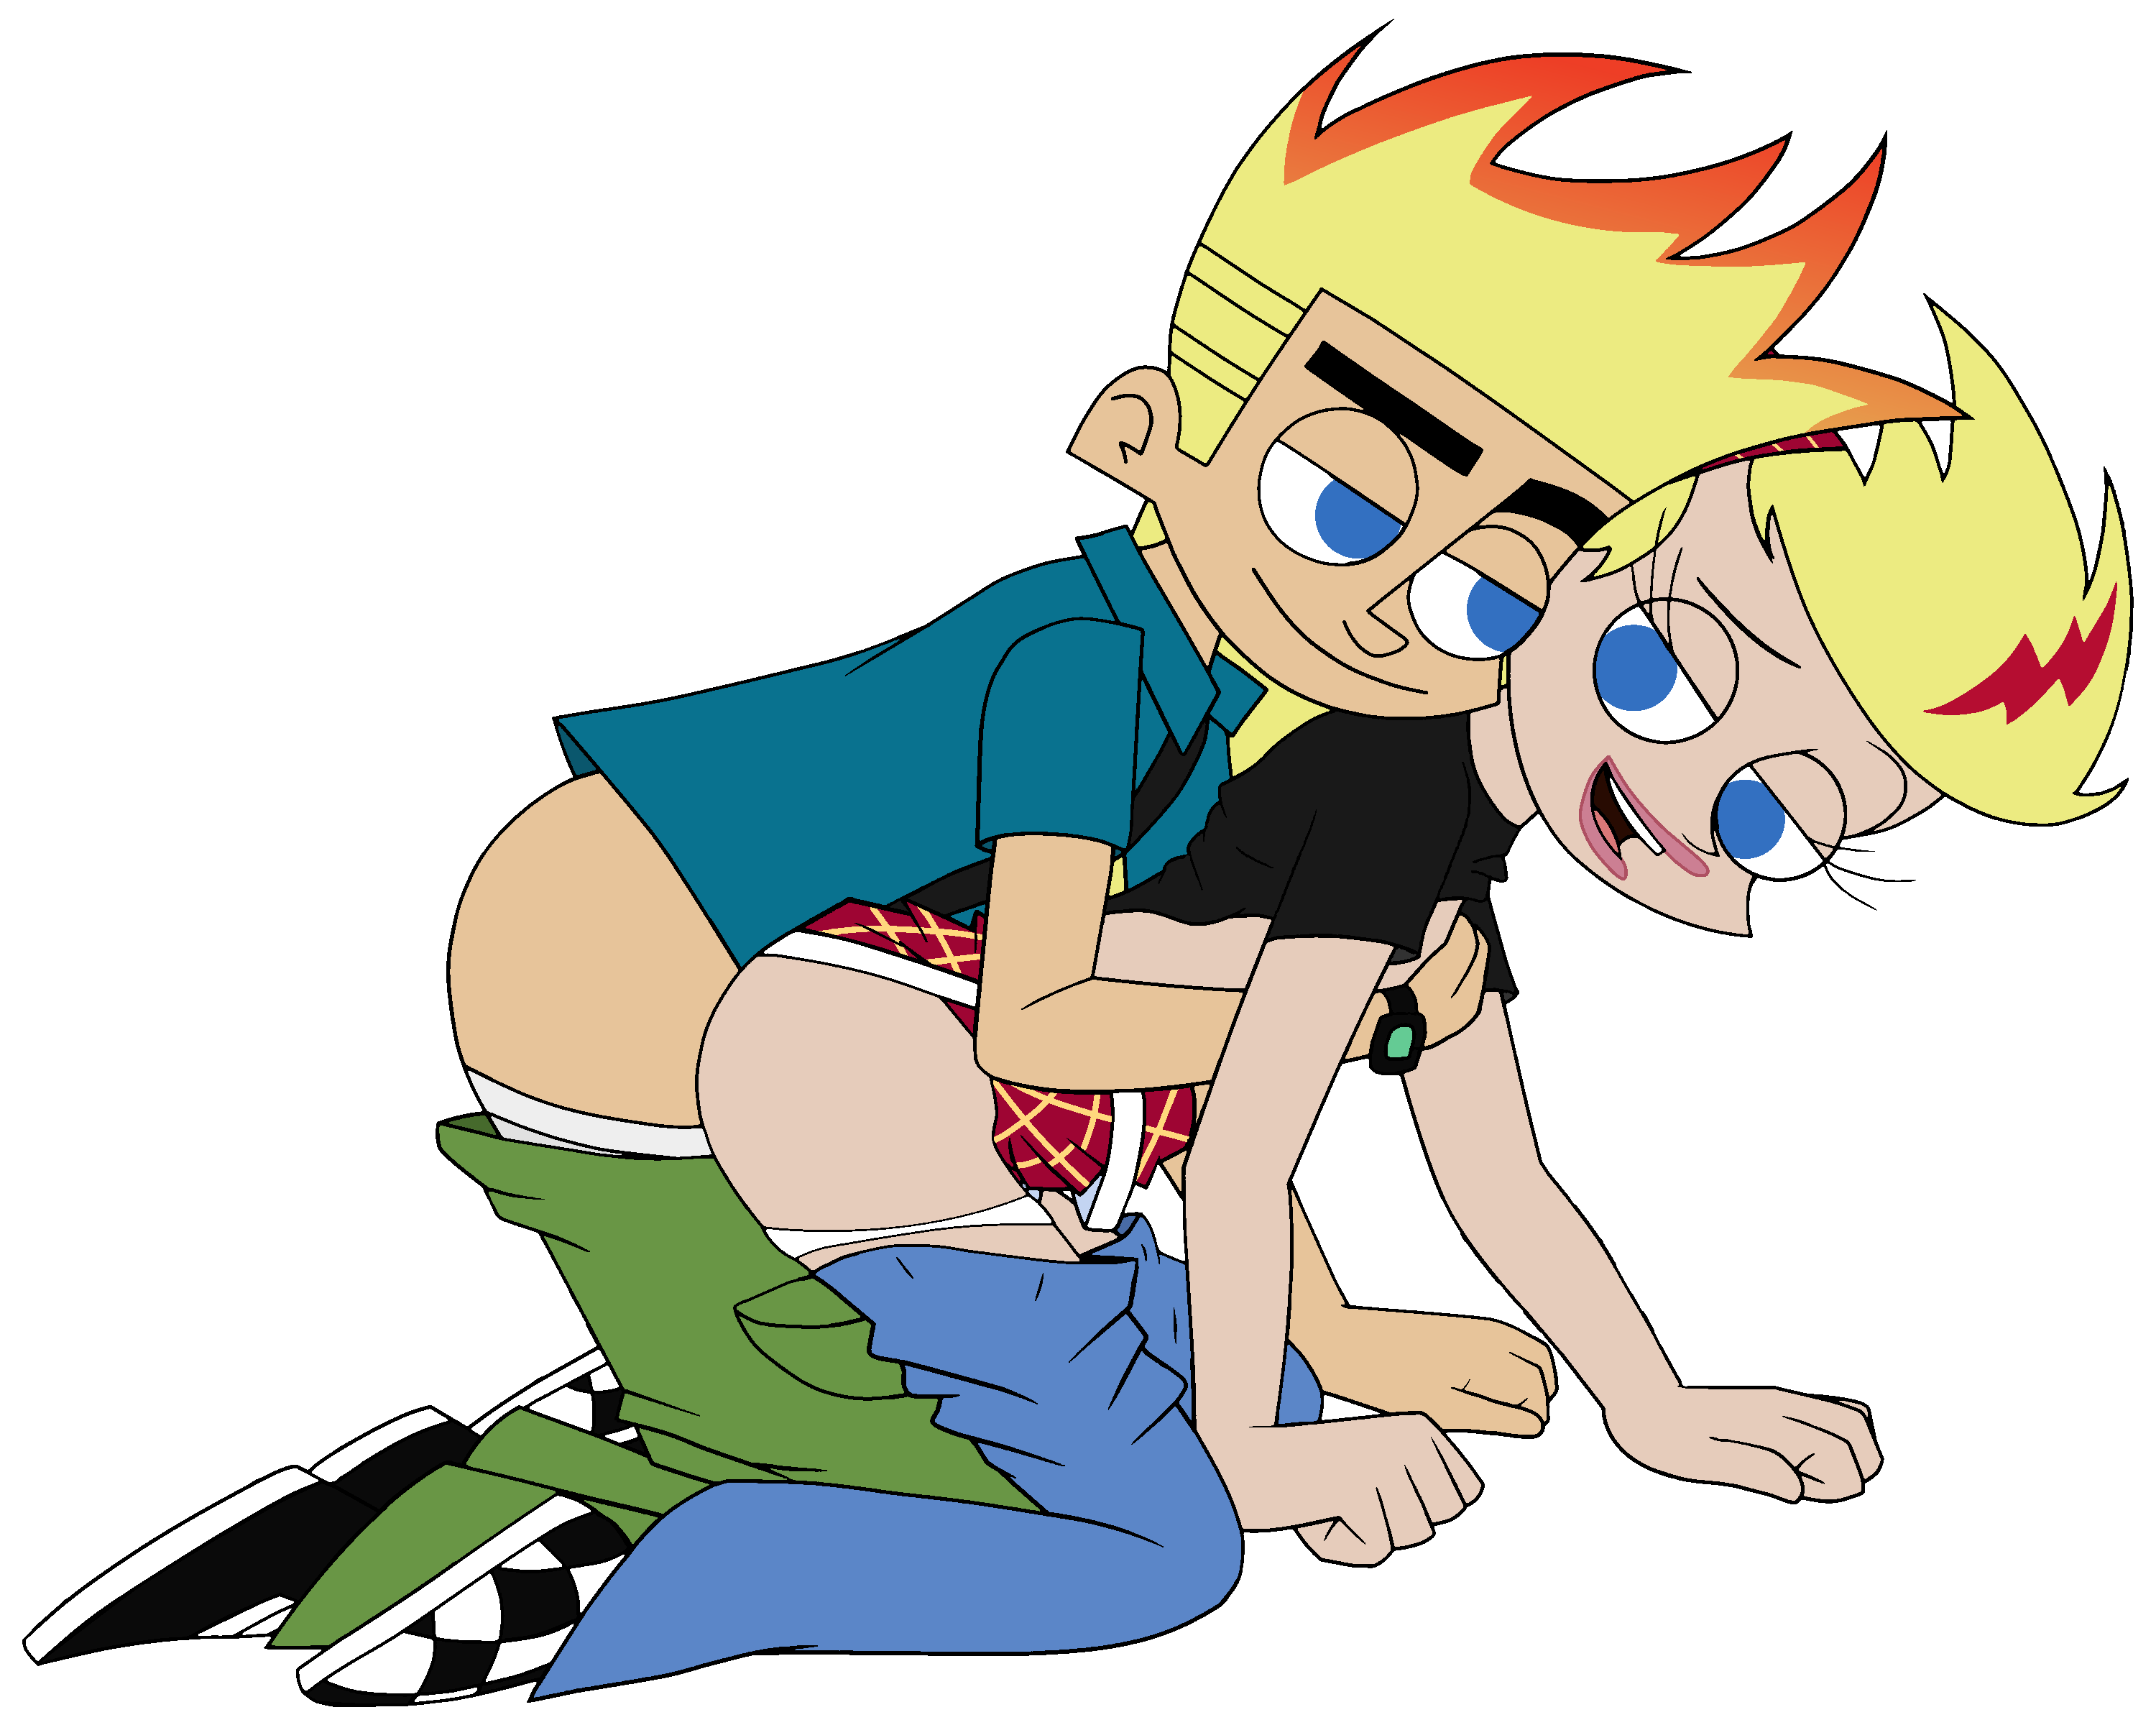 andrew mollison recommends johnny test and sissy having sex pic